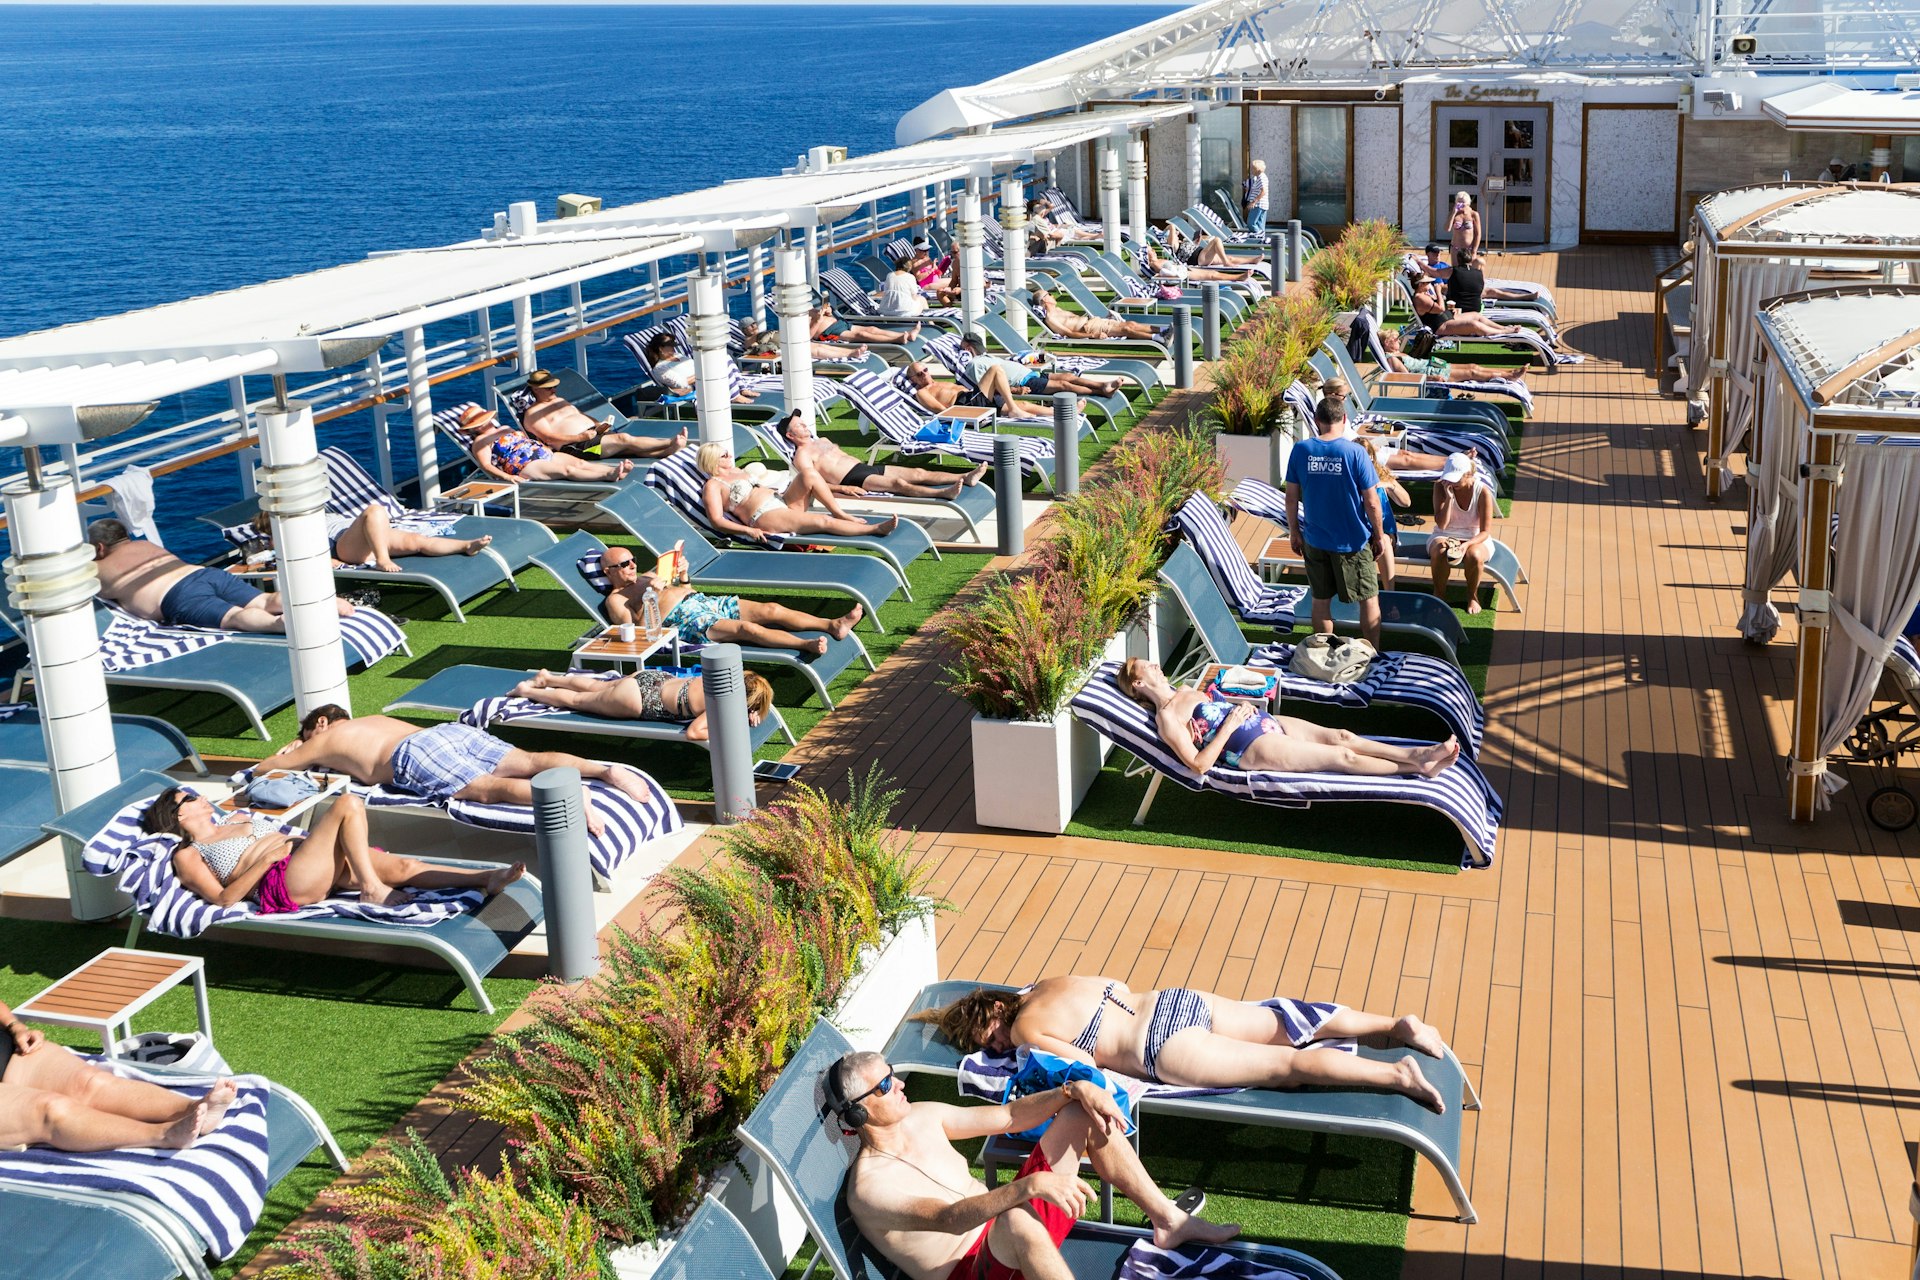 Passengers sun themselves on blue sun loungers lined up along the deck of a cruise ship. The boat's edge is visible with the blue sea beyond.